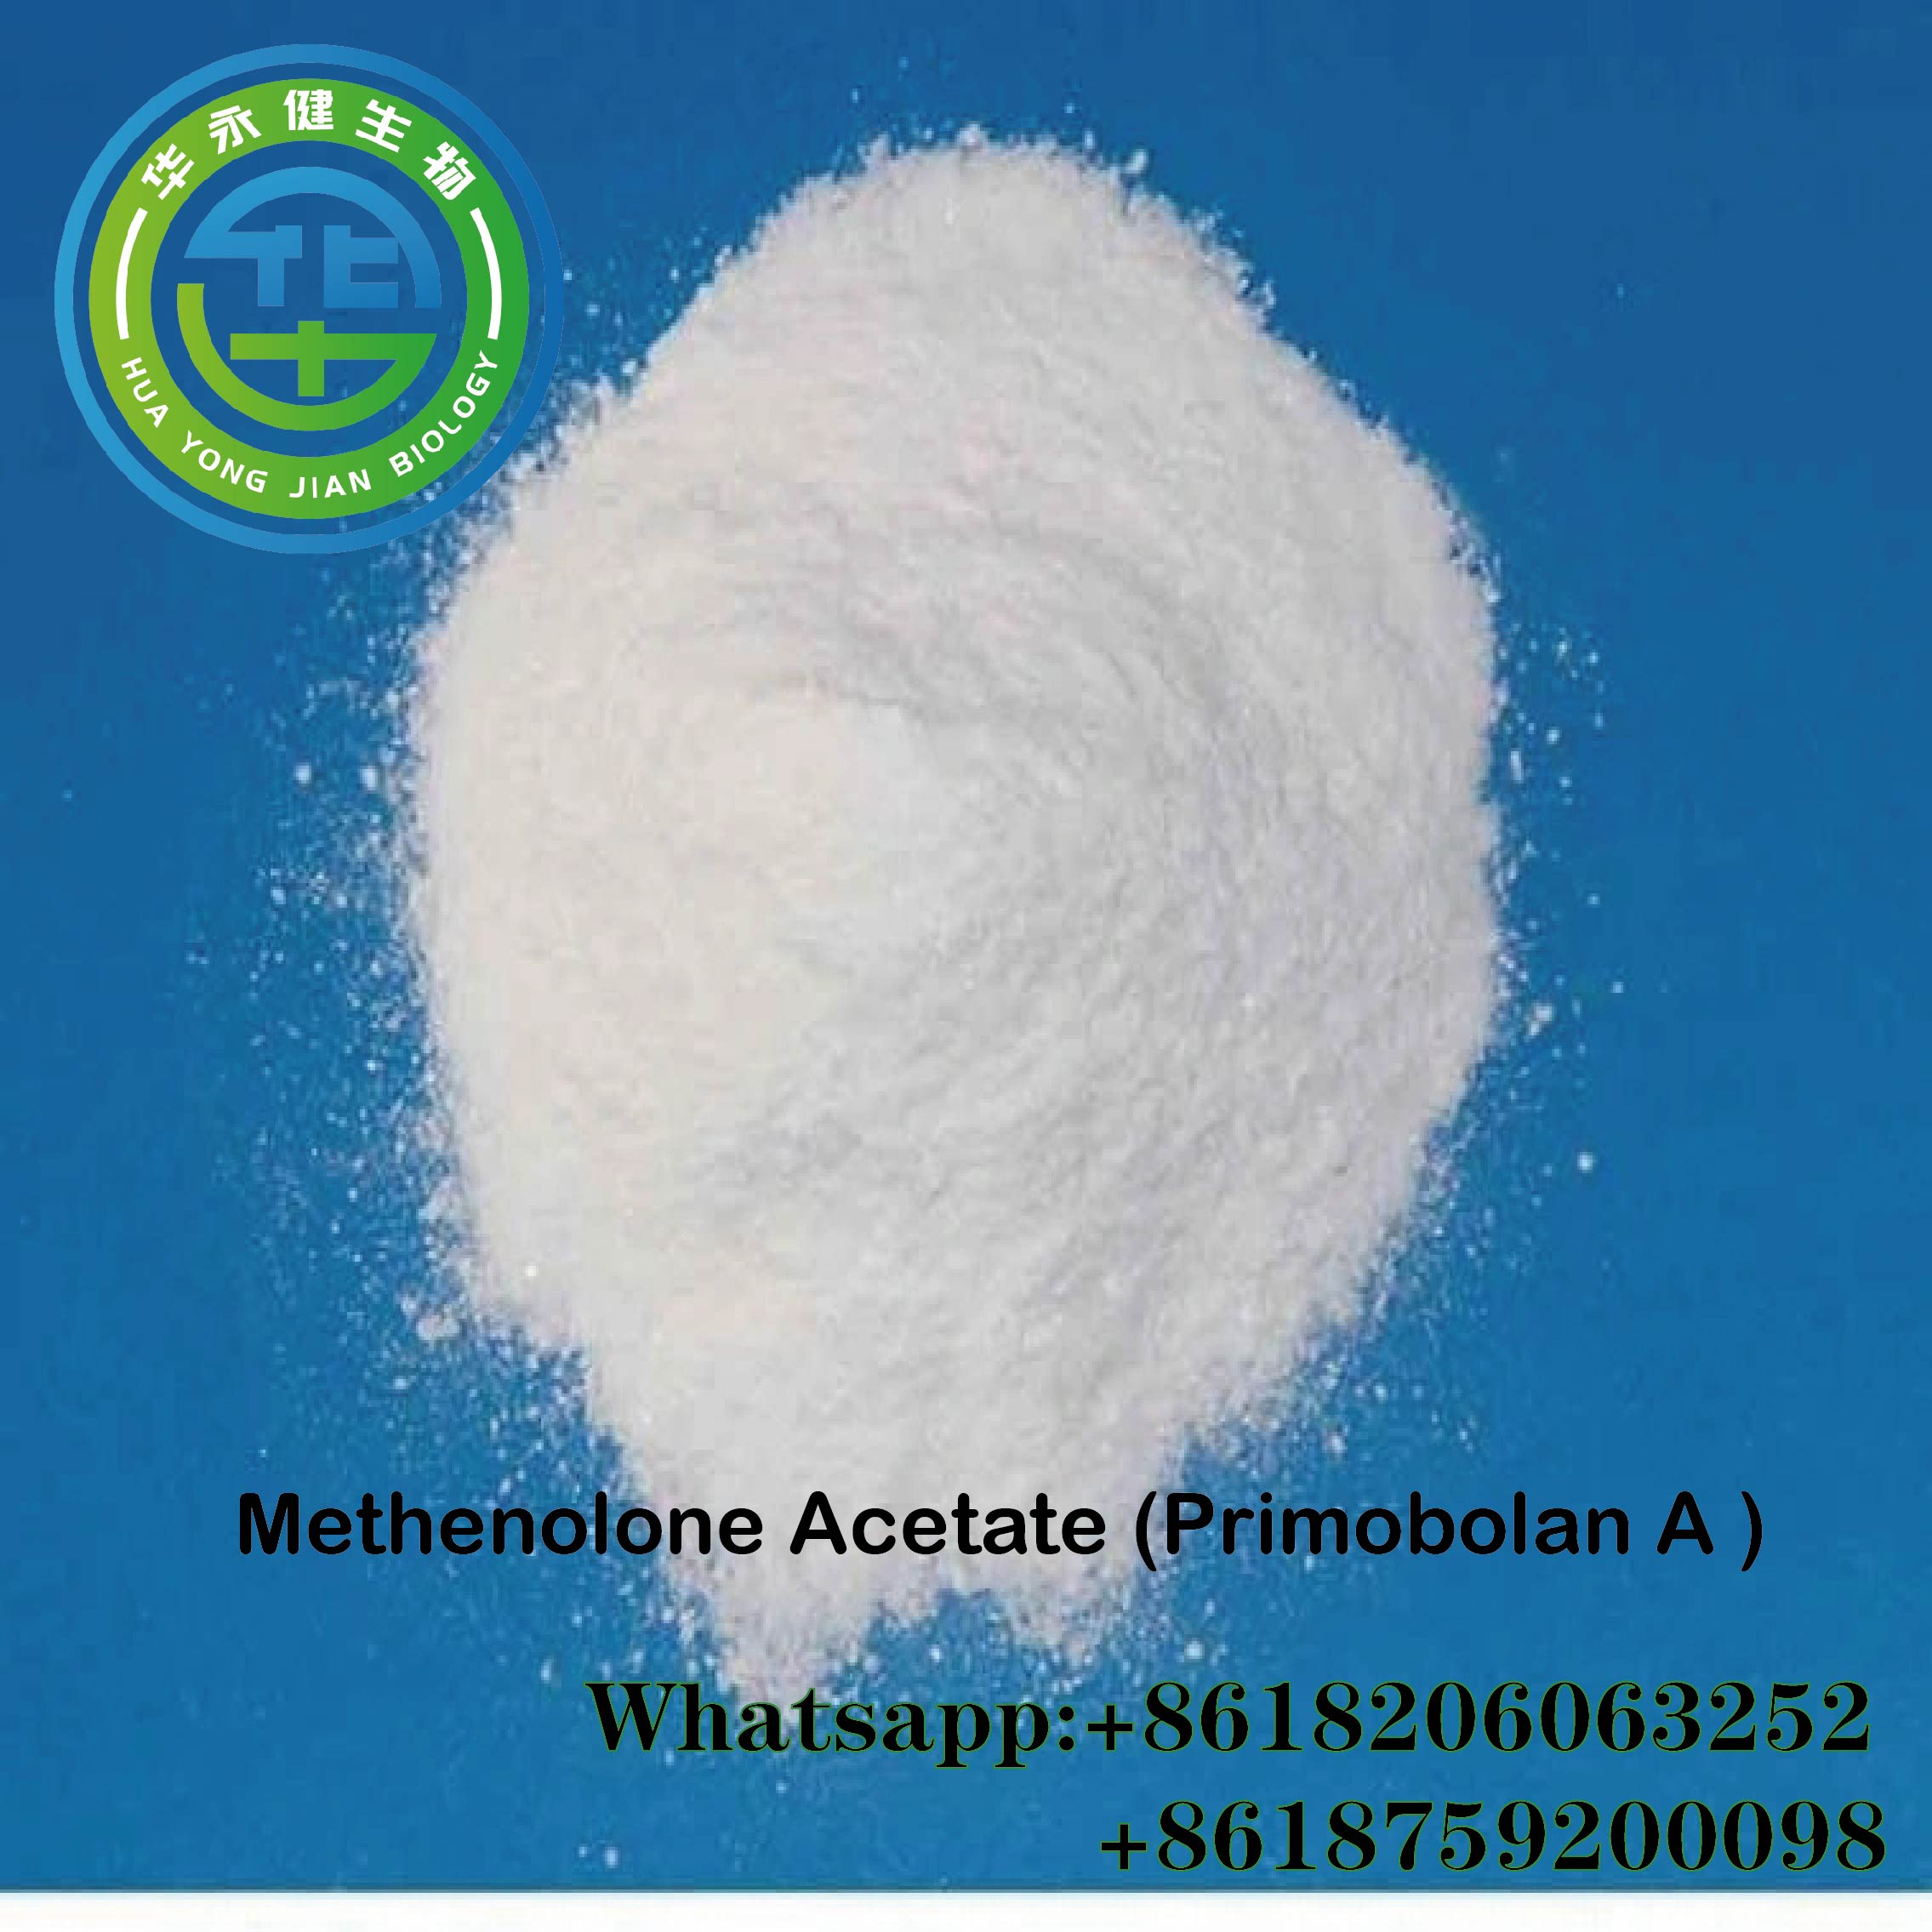  China Best Seller Primobolan Acetate Raw Powder CAS 434-05-9 for Muscle Gain and Bodybuilding with Fast Delivery to USA